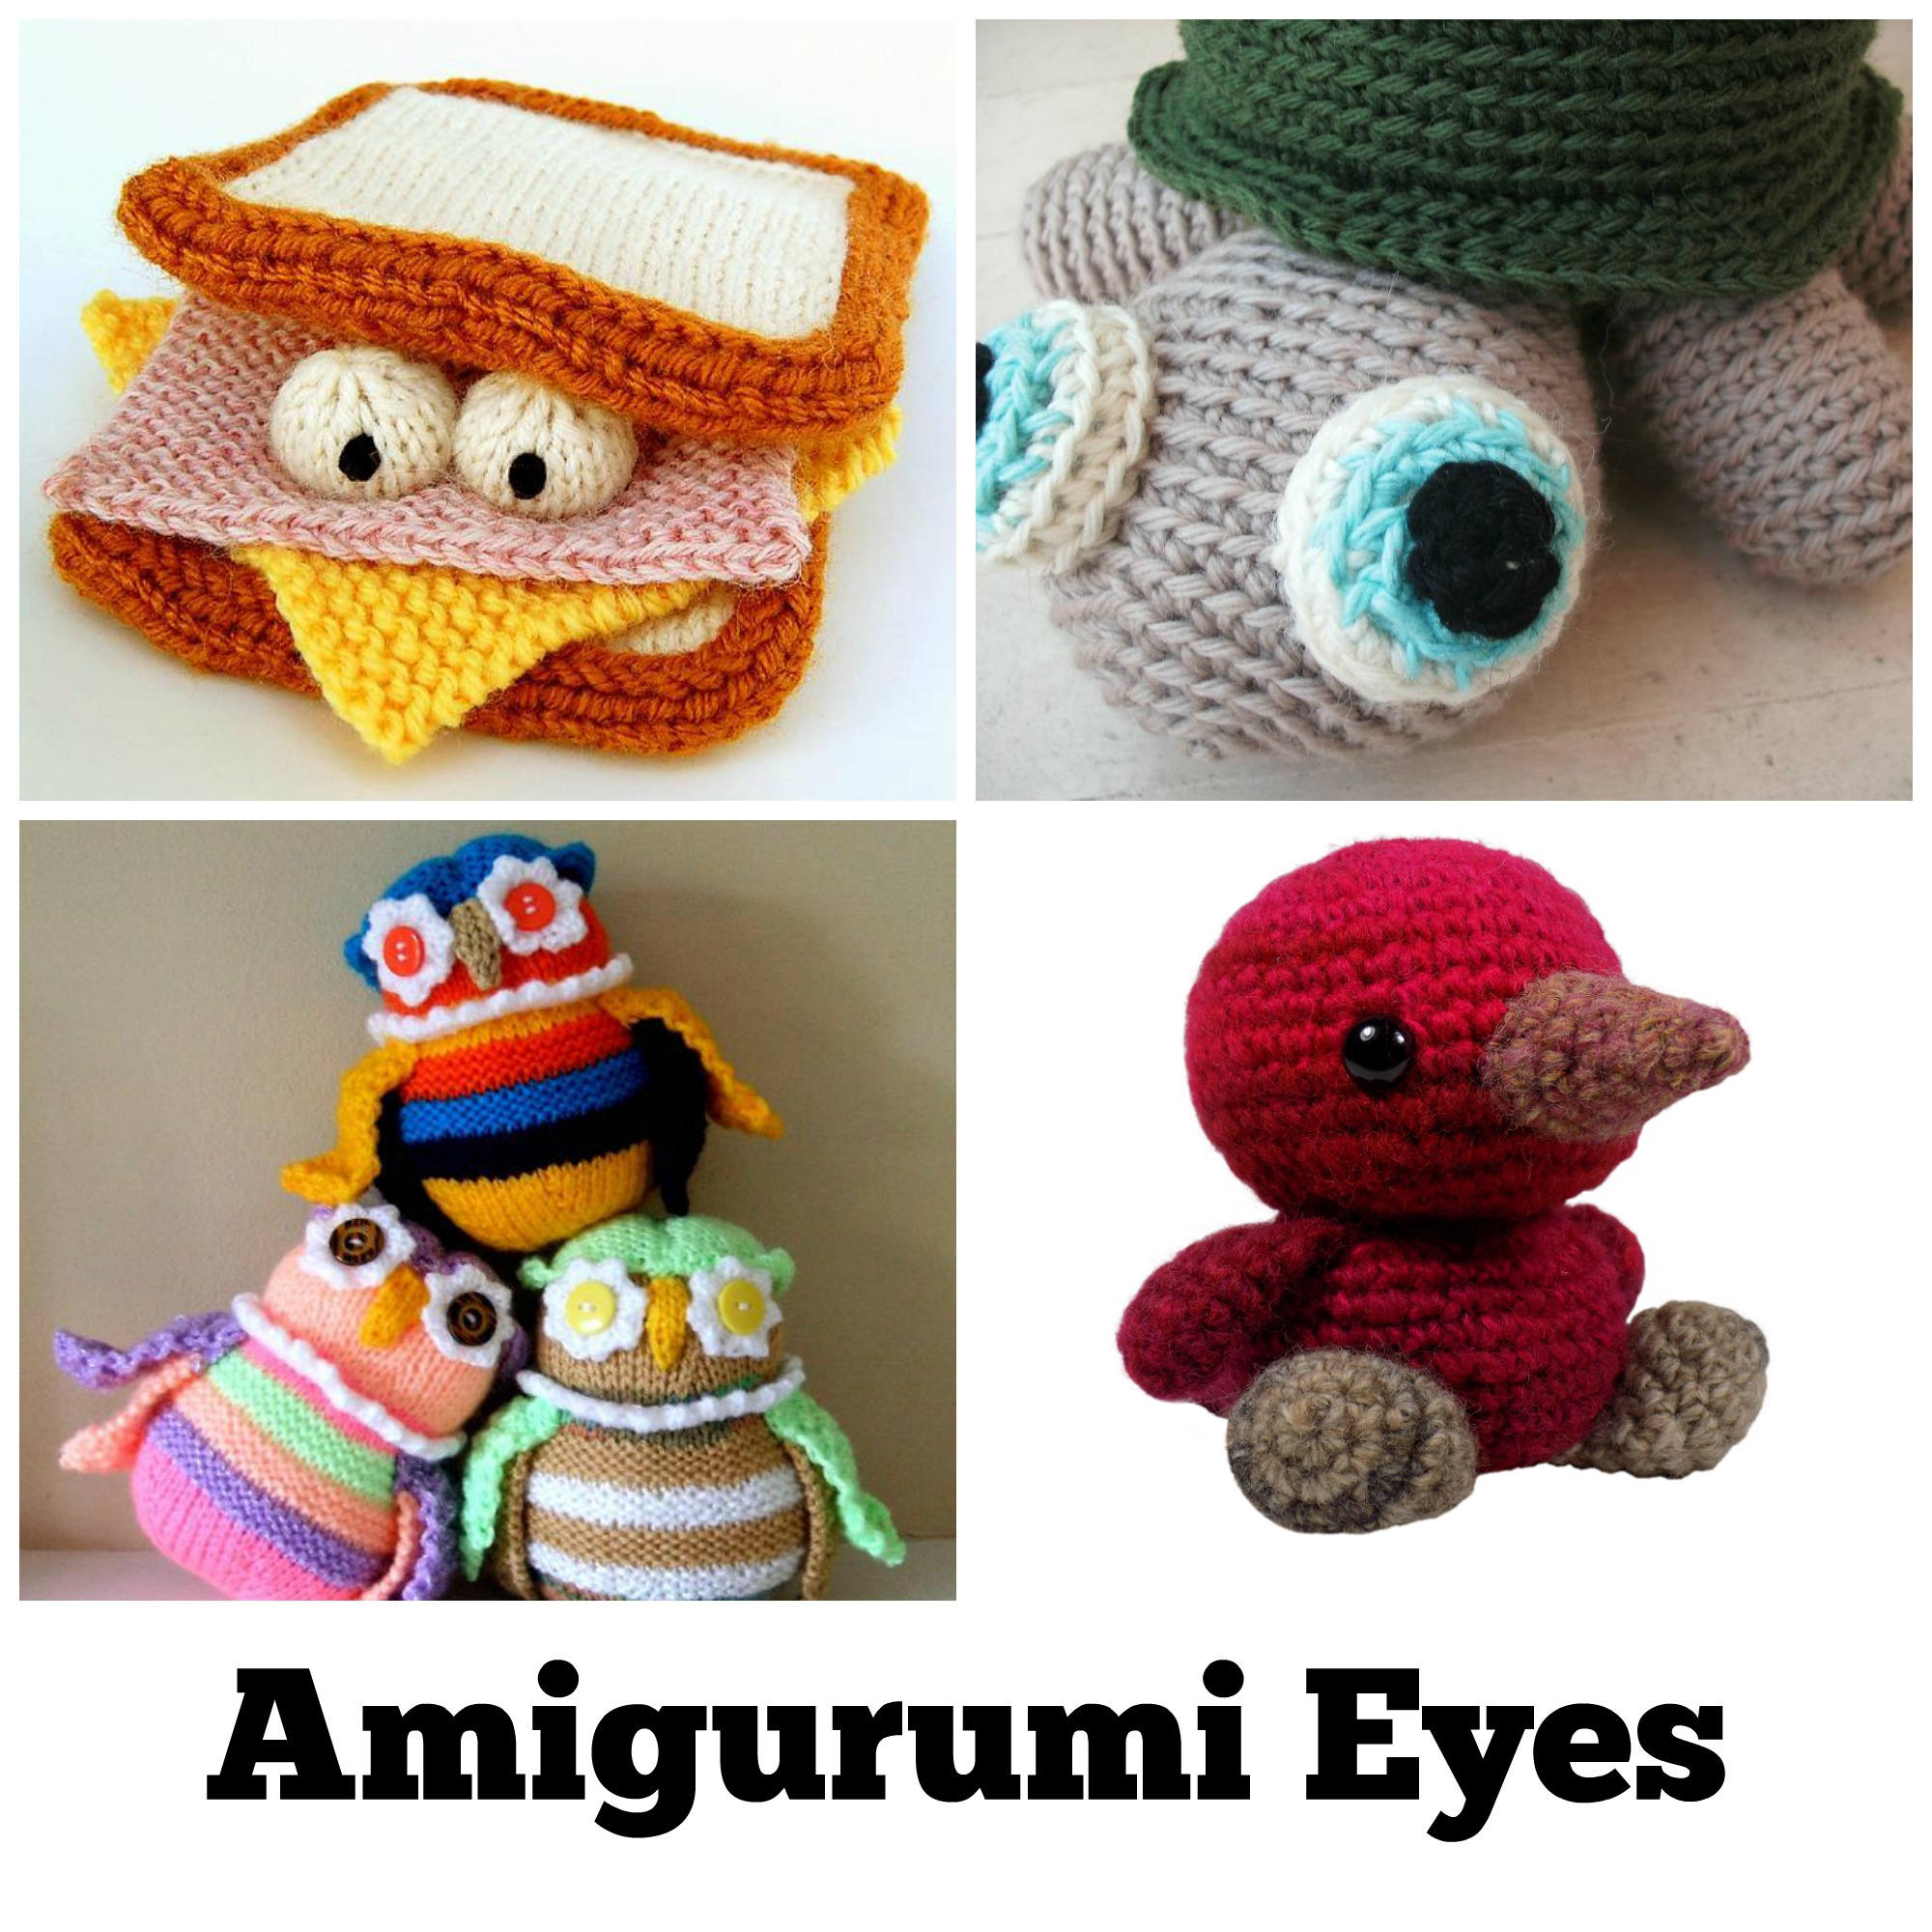 Crochet With Embroidery Floss Patterns 5 Types Of Amigurumi Eyes For Your Cuddly Creation